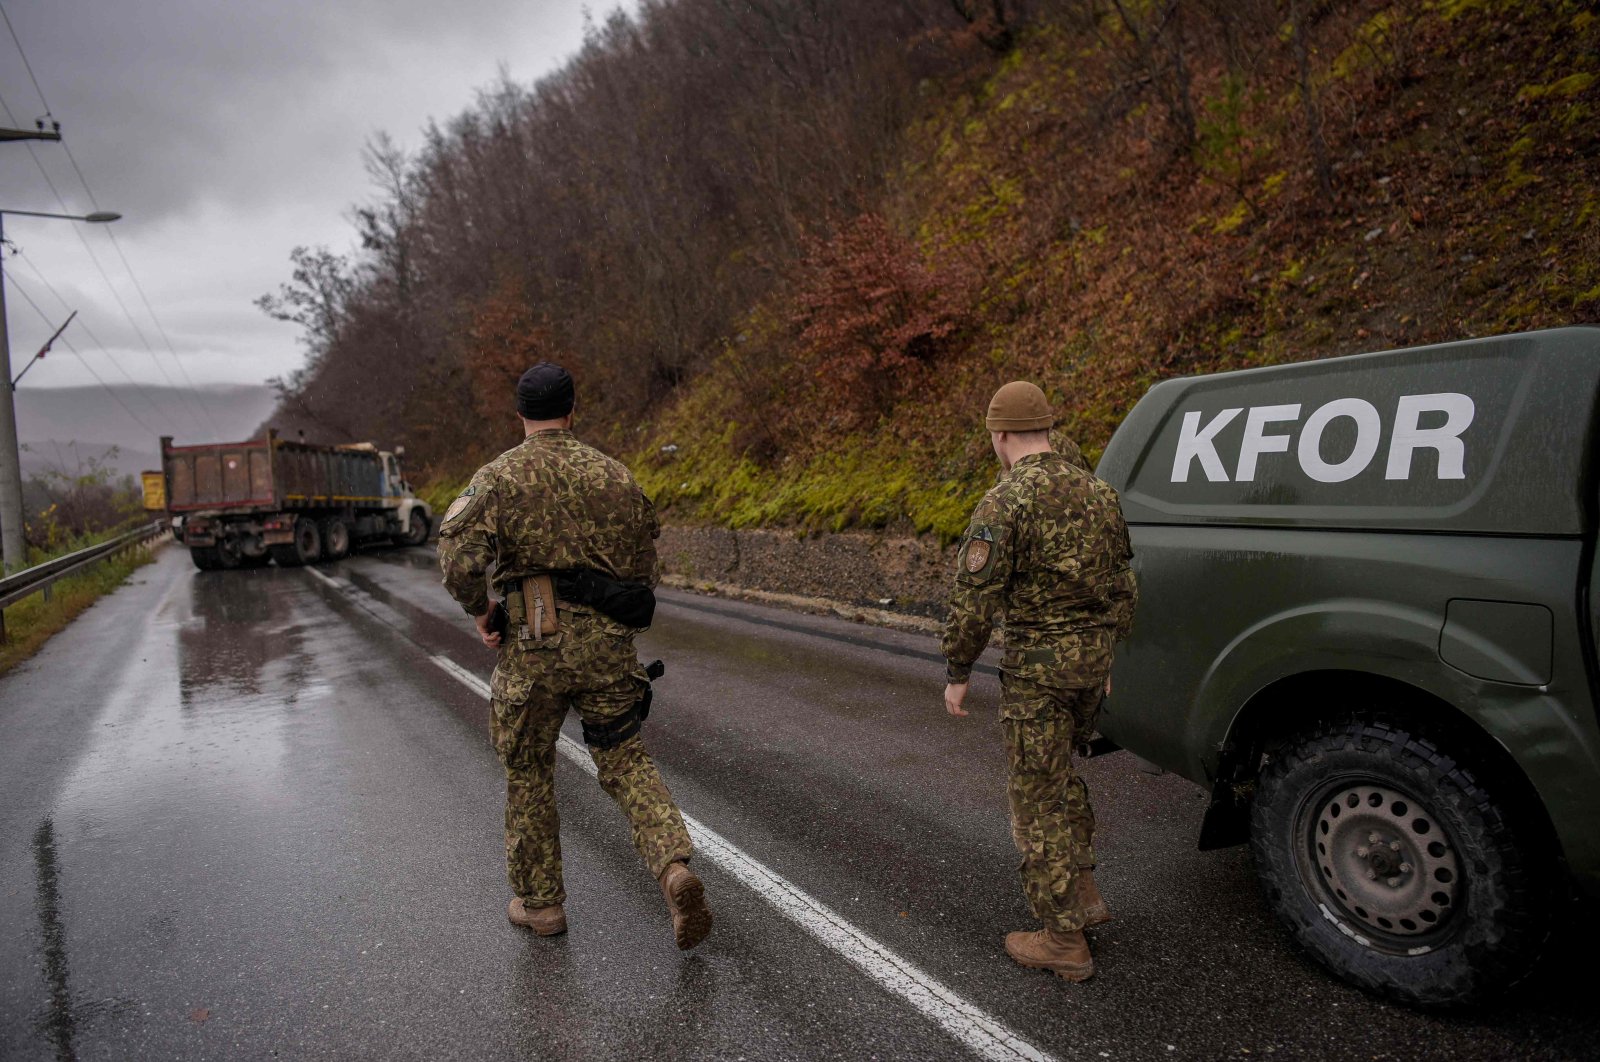 NATO peacekeepers in Kosovo (KFOR) inspect a road barricade set up by ethnic Serbs near the town of Zubin Potok, Kosovo, Dec. 11, 2022. (AFP Photo)